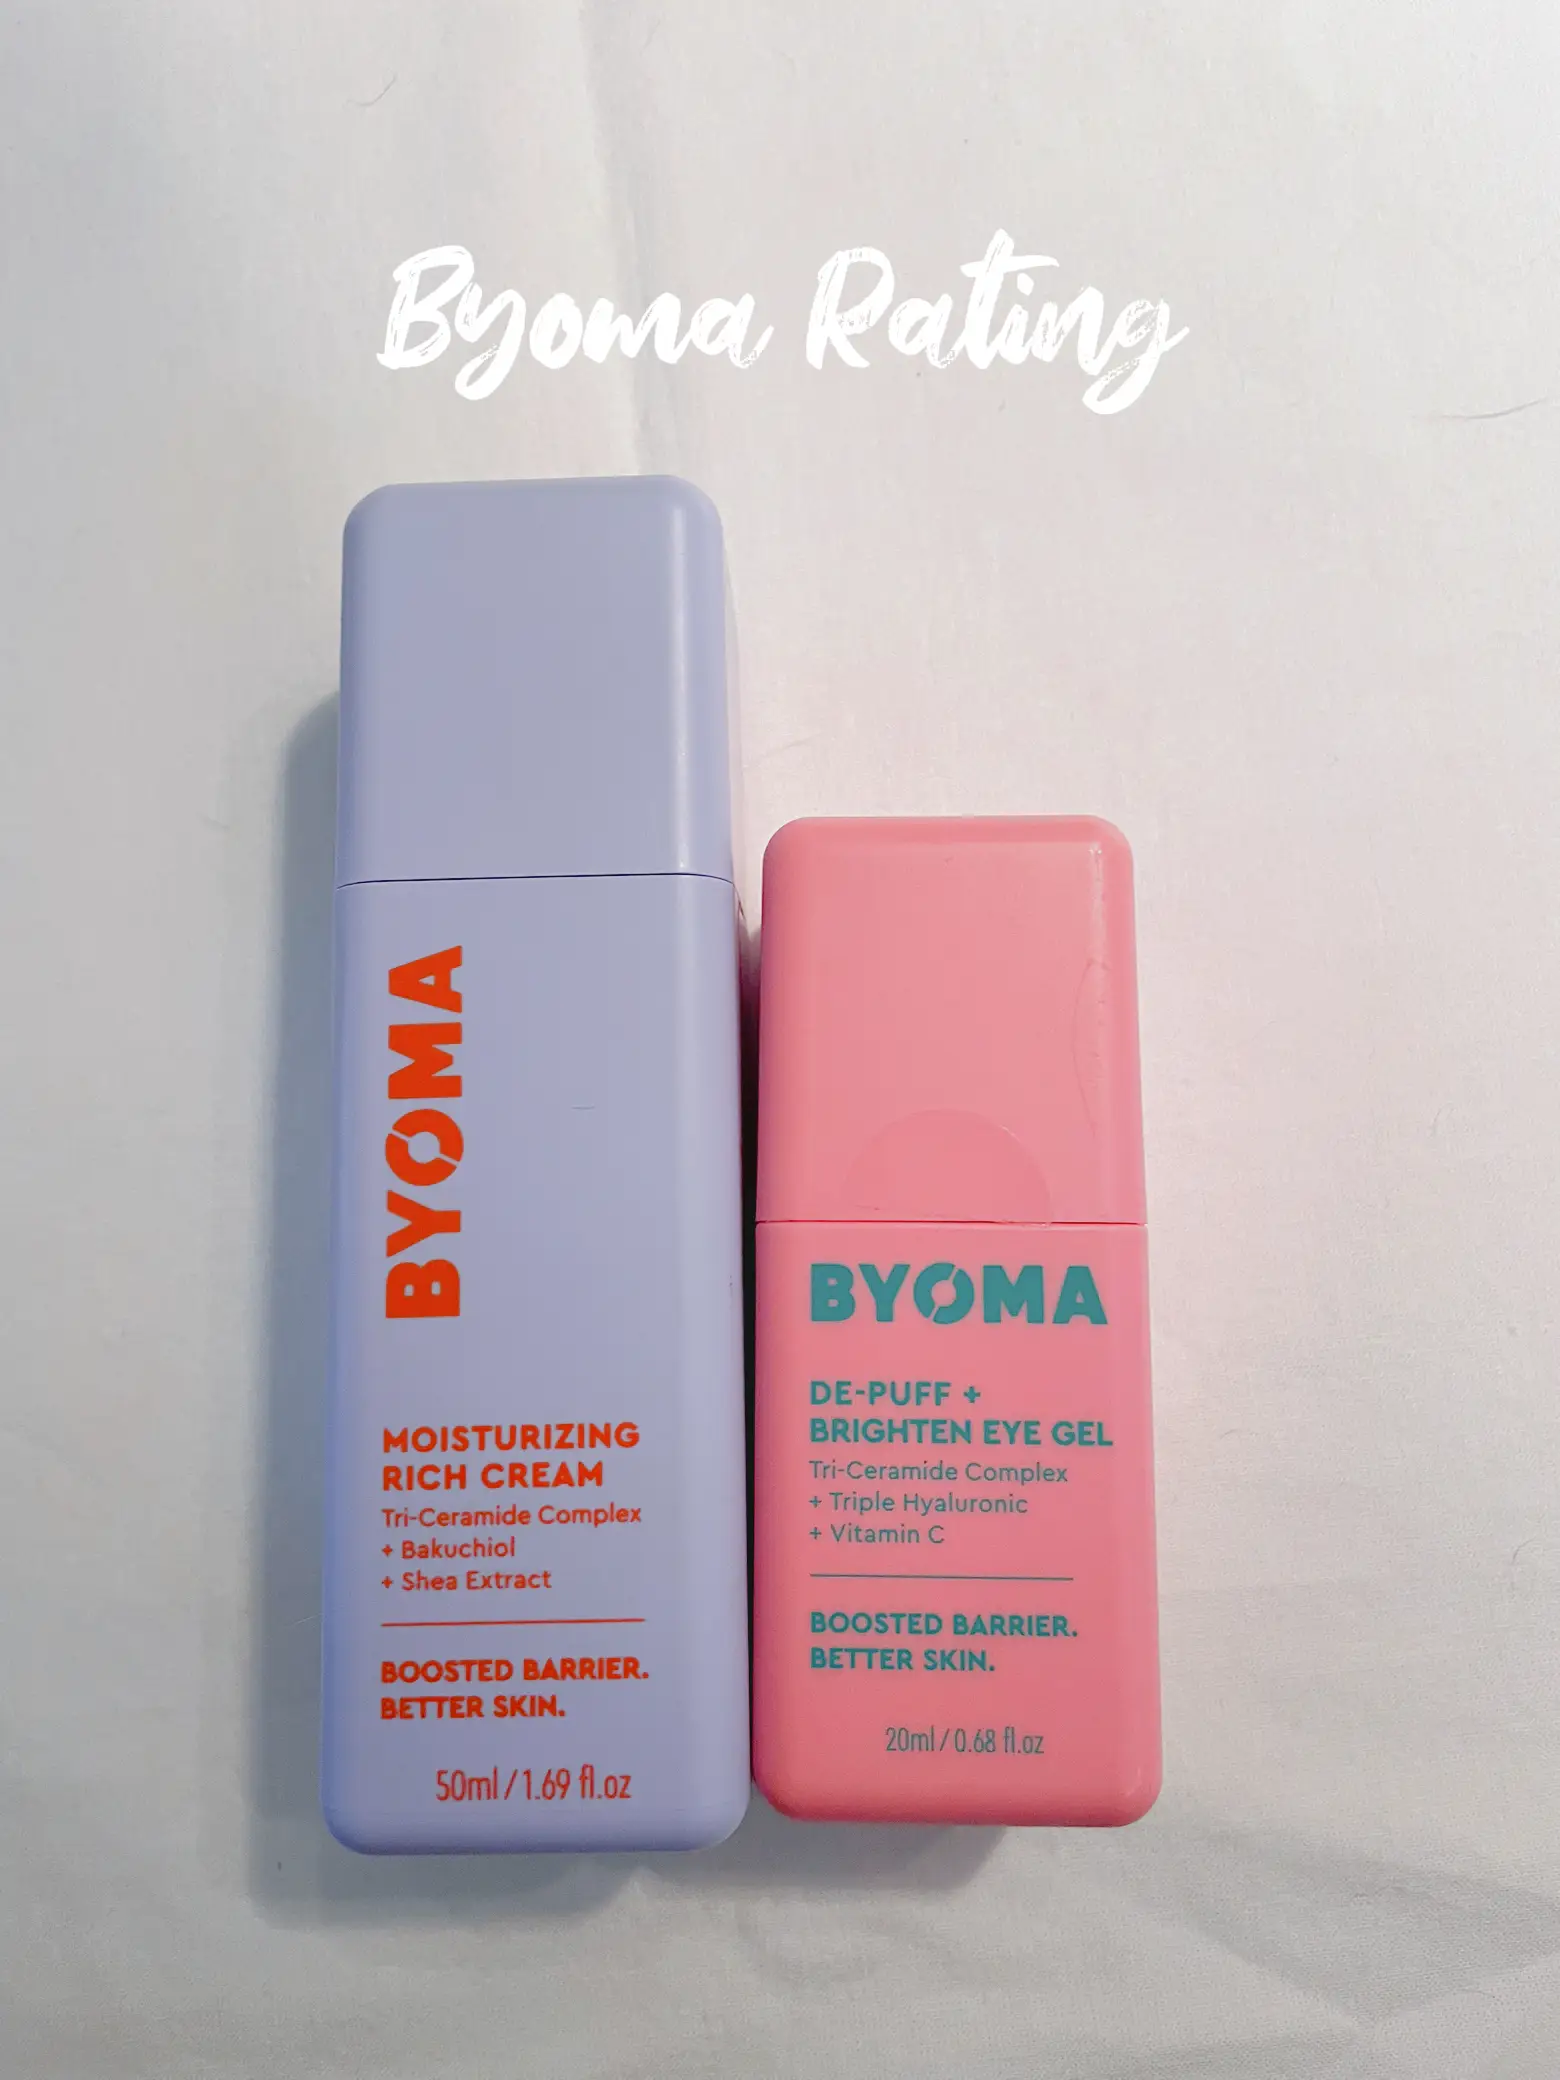 Byoma Skincare Review: Here are my honest thoughts